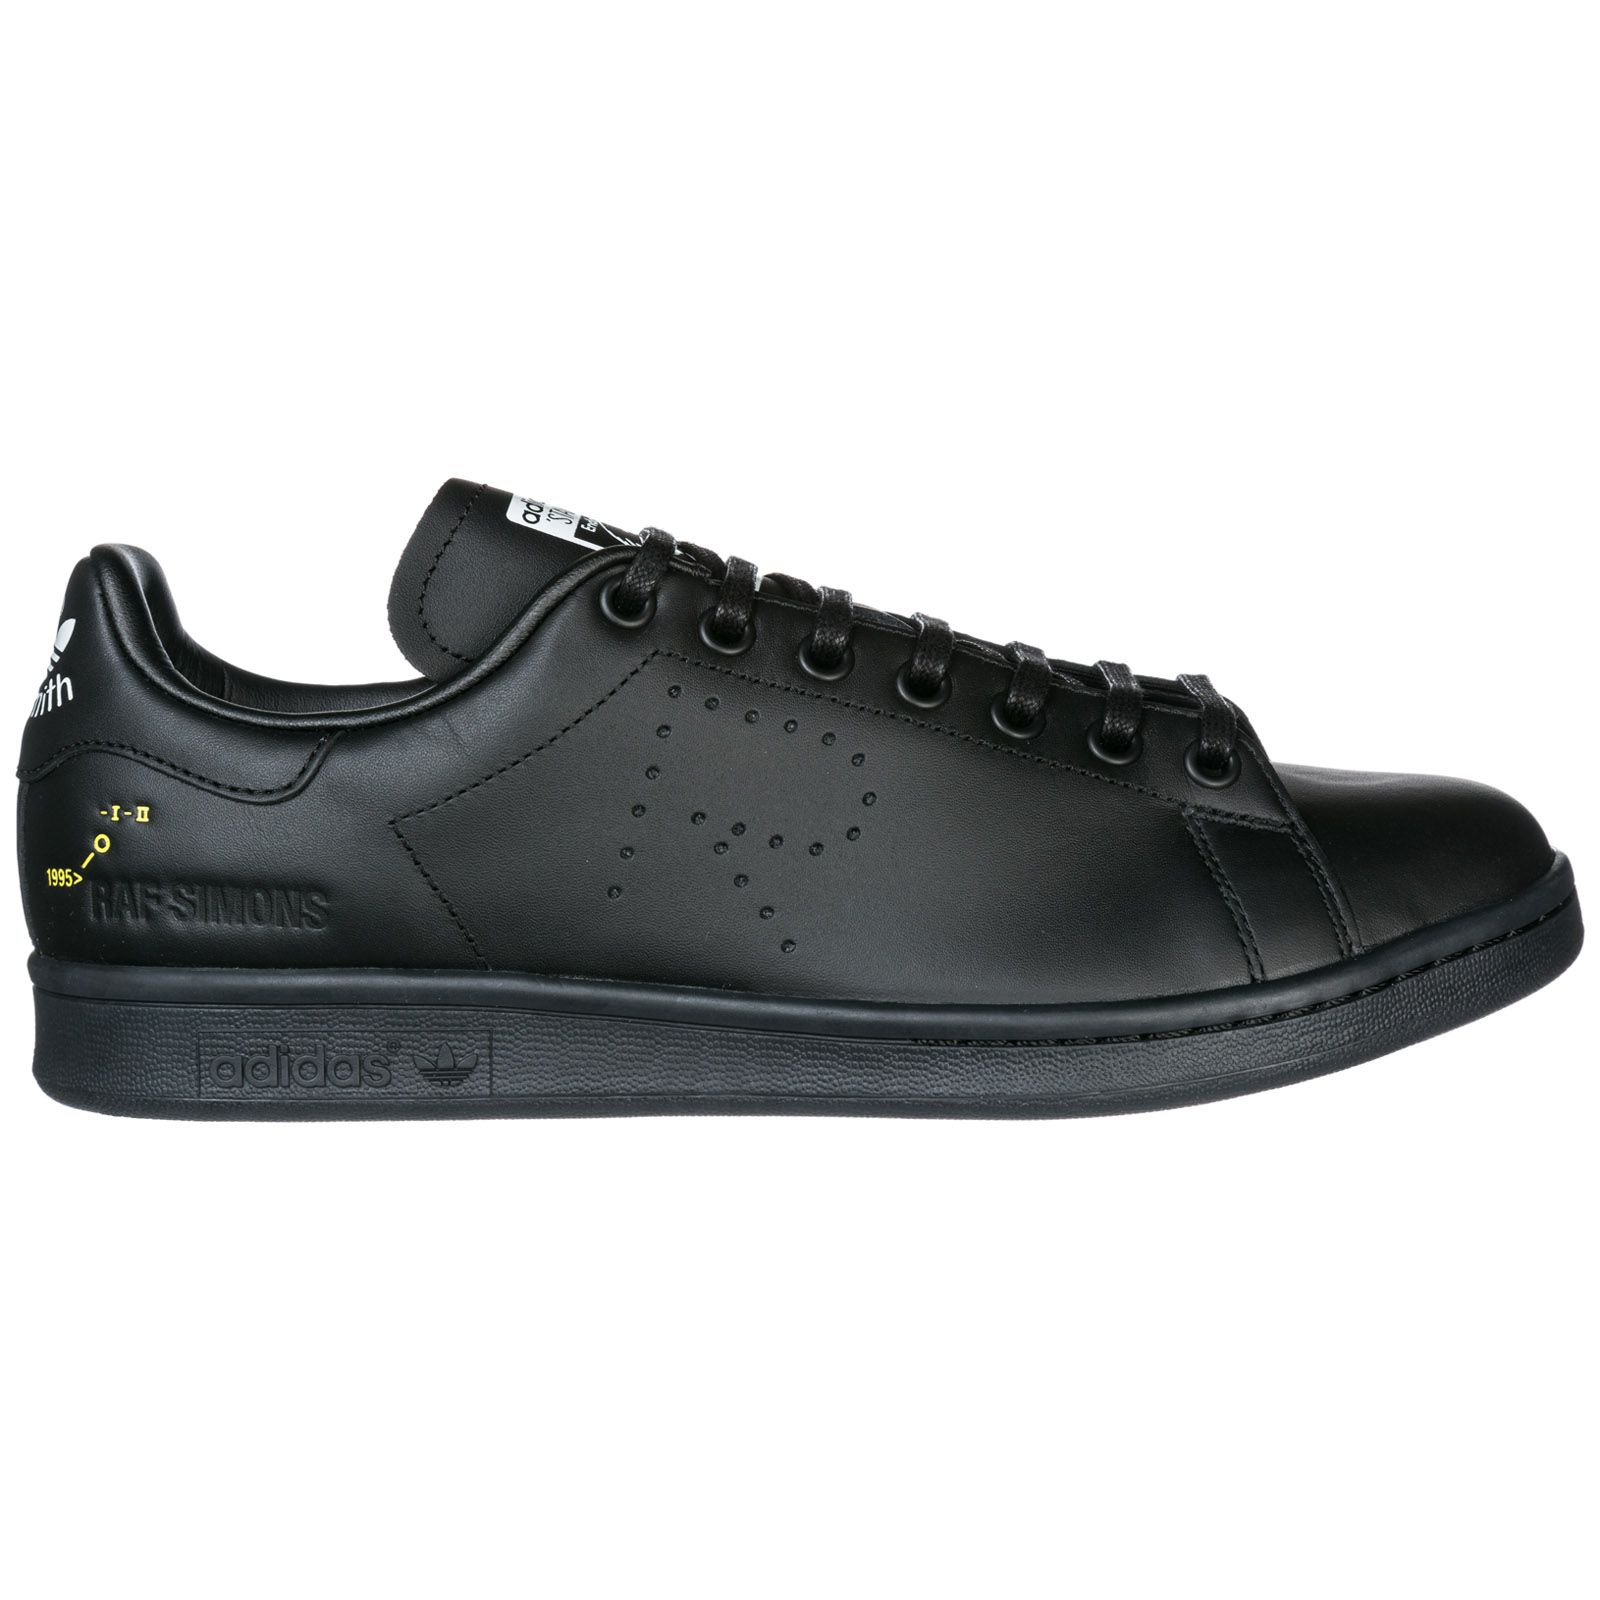 Adidas By Raf Simons Men's Shoes Leather Trainers Sneakers Rs Stan Smith In  Cblack/dgsogr/cwhite | ModeSens